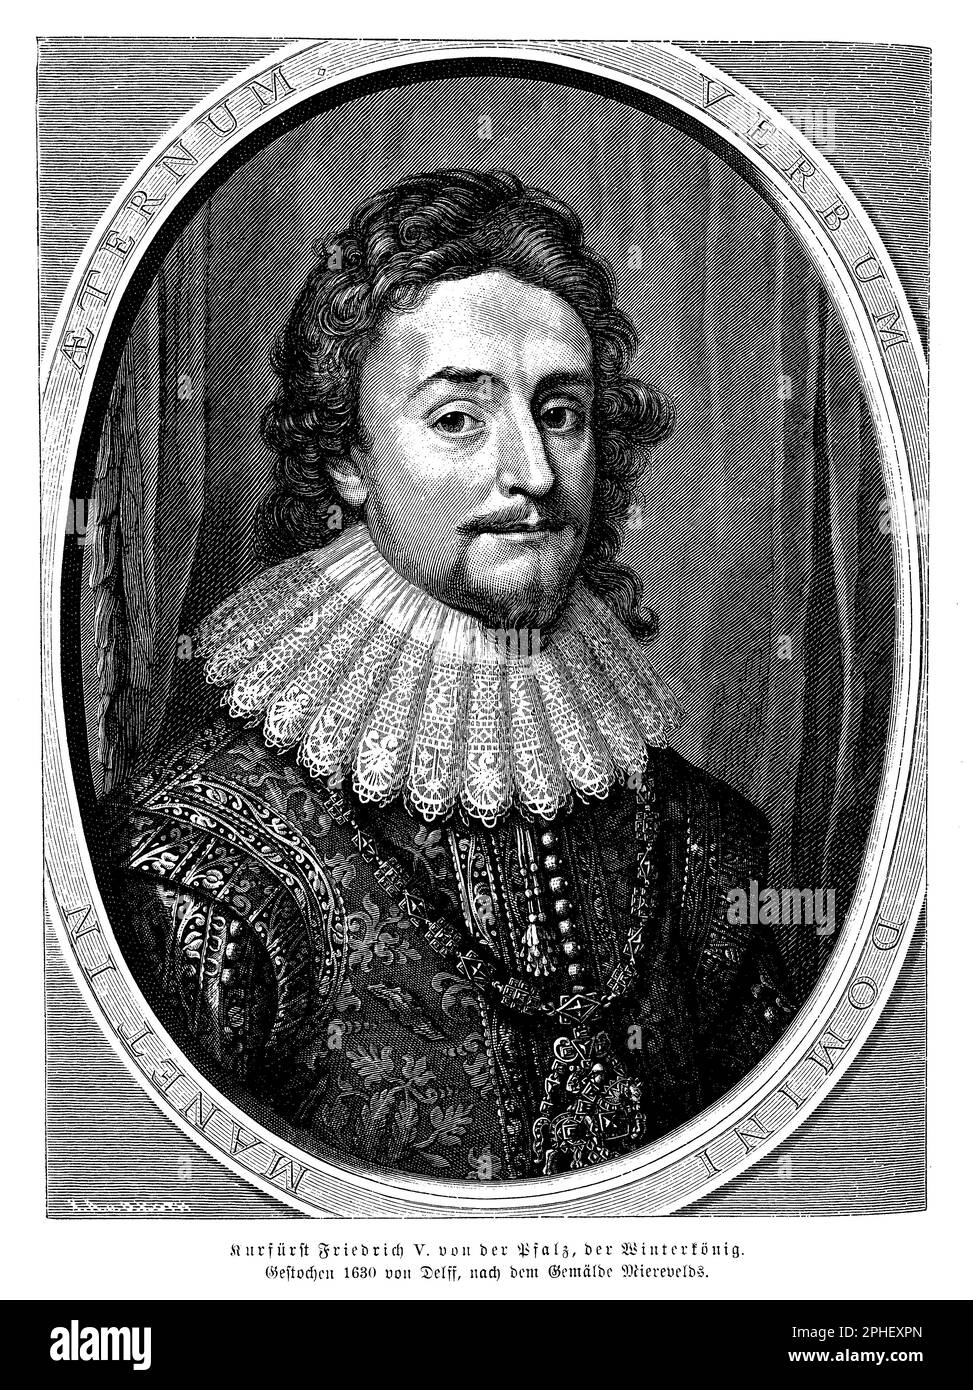 Frederick V (1596-1632), also known as the Winter King, was the Elector Palatine of the Rhine and briefly King of Bohemia during the early years of the Thirty Years' War. He was a Protestant leader and played a key role in the Bohemian Revolt, which began with the Defenestration of Prague. Frederick's reign was marked by political and military setbacks, culminating in his defeat at the Battle of White Mountain in 1620, which led to his exile and the confiscation of his lands. Despite this, he remained a symbol of Protestant resistance and his legacy endured in the memory of his supporters Stock Photo